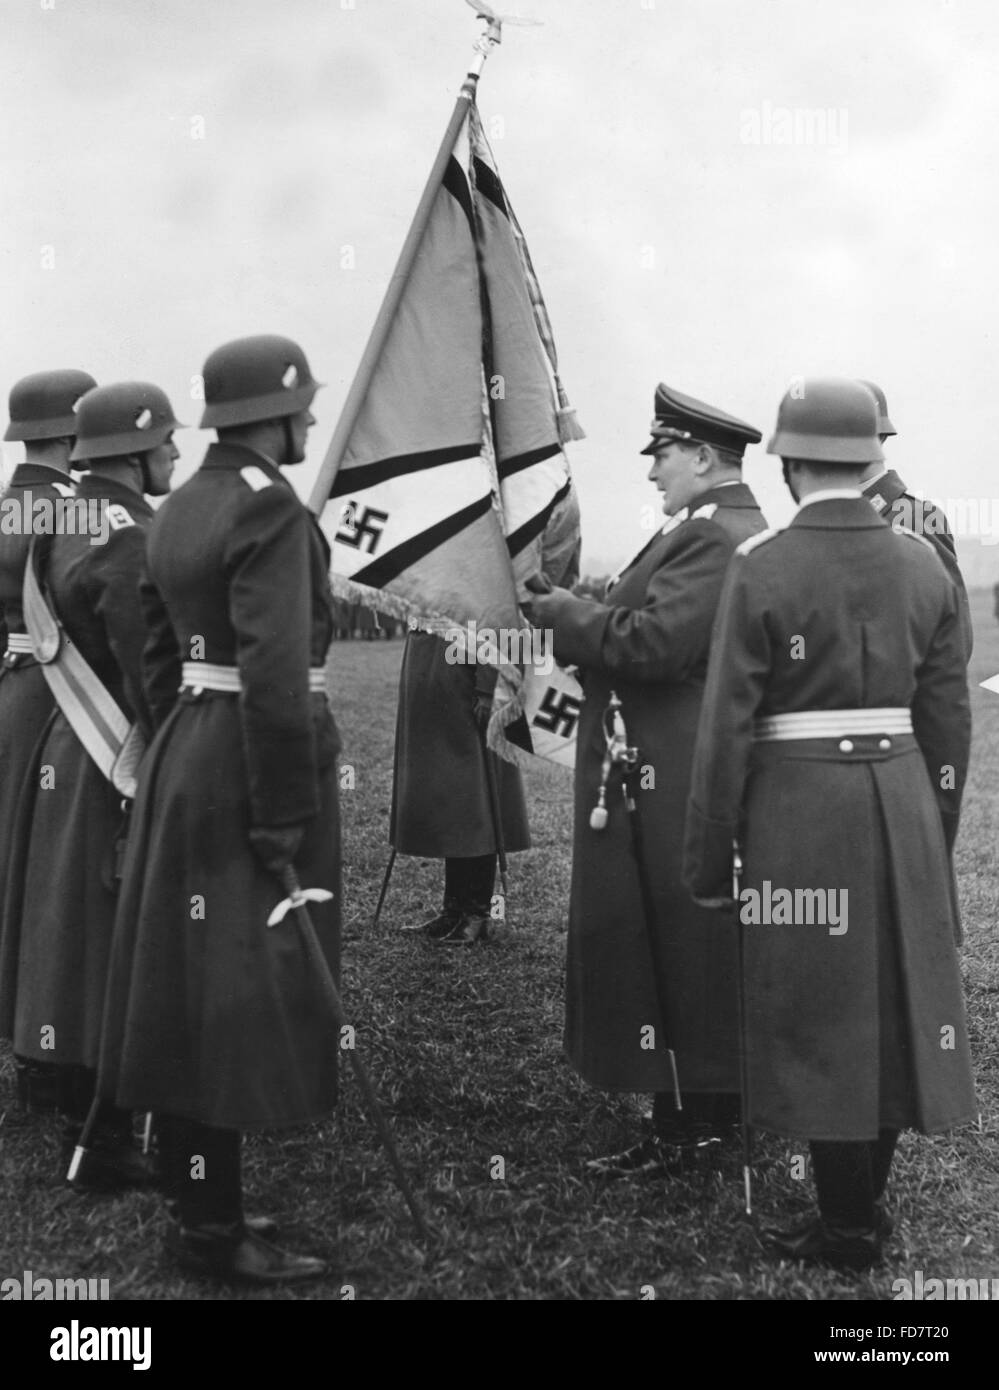 Handover of flags to the Luftwaffe by Hermann Goering in Rakow, 1937 Stock Photo